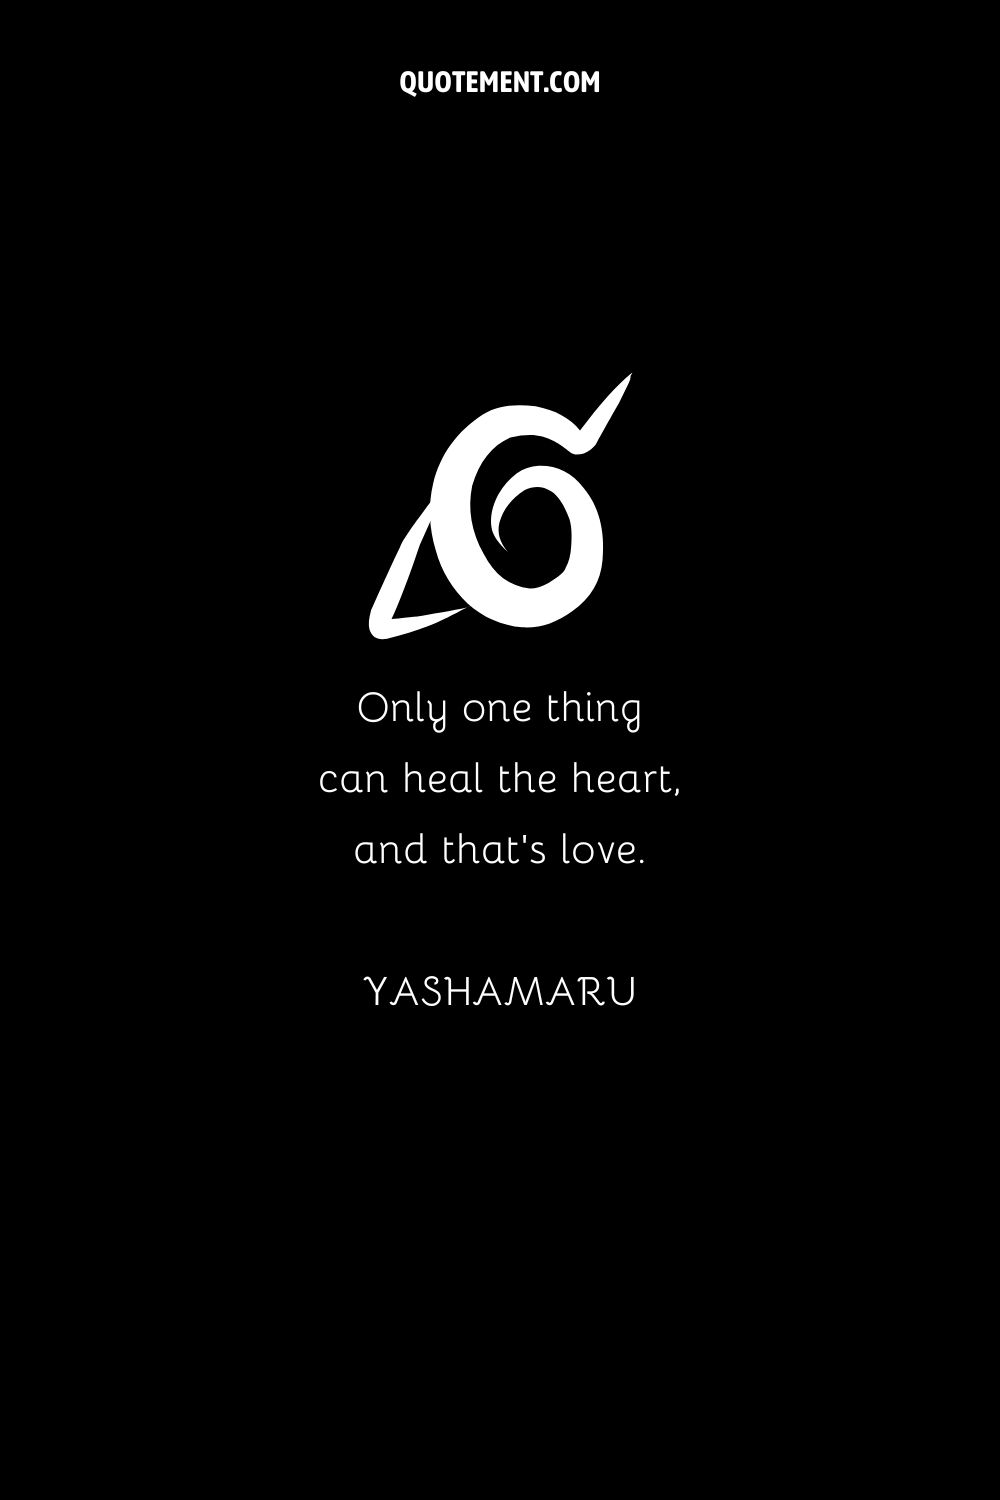 “Only one thing can heal the heart, and that’s love.” — Yashamaru